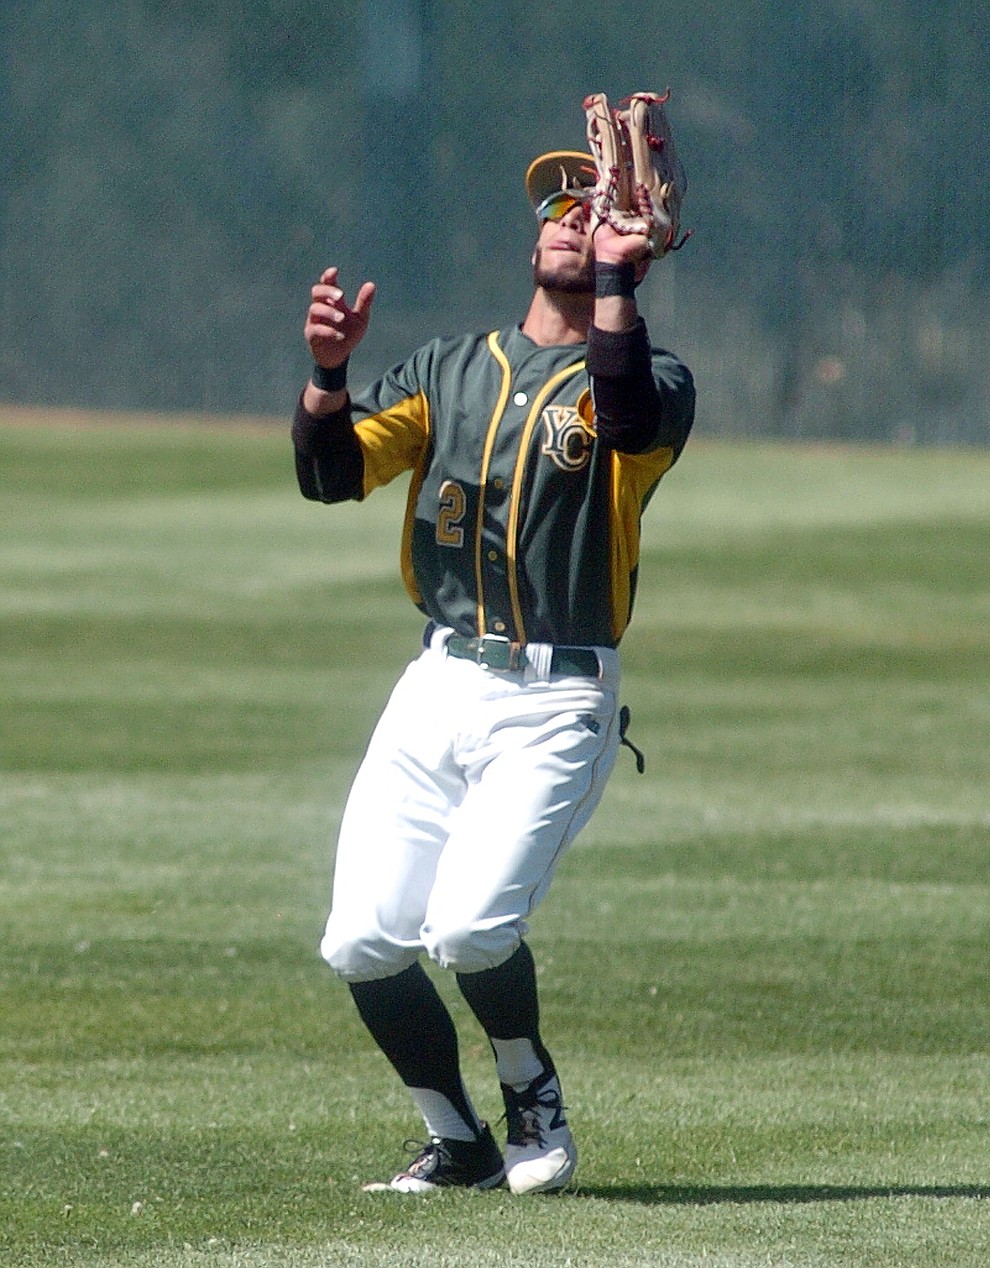 Yavapai's Nate Easley makes a catch against South Mountain in the first game of the NJCAA Region 1 Division 1 semifinals Thursday in Prescott. (Les Stukenberg/The Daily Courier) (Les Stukenberg/The Daily Courier)